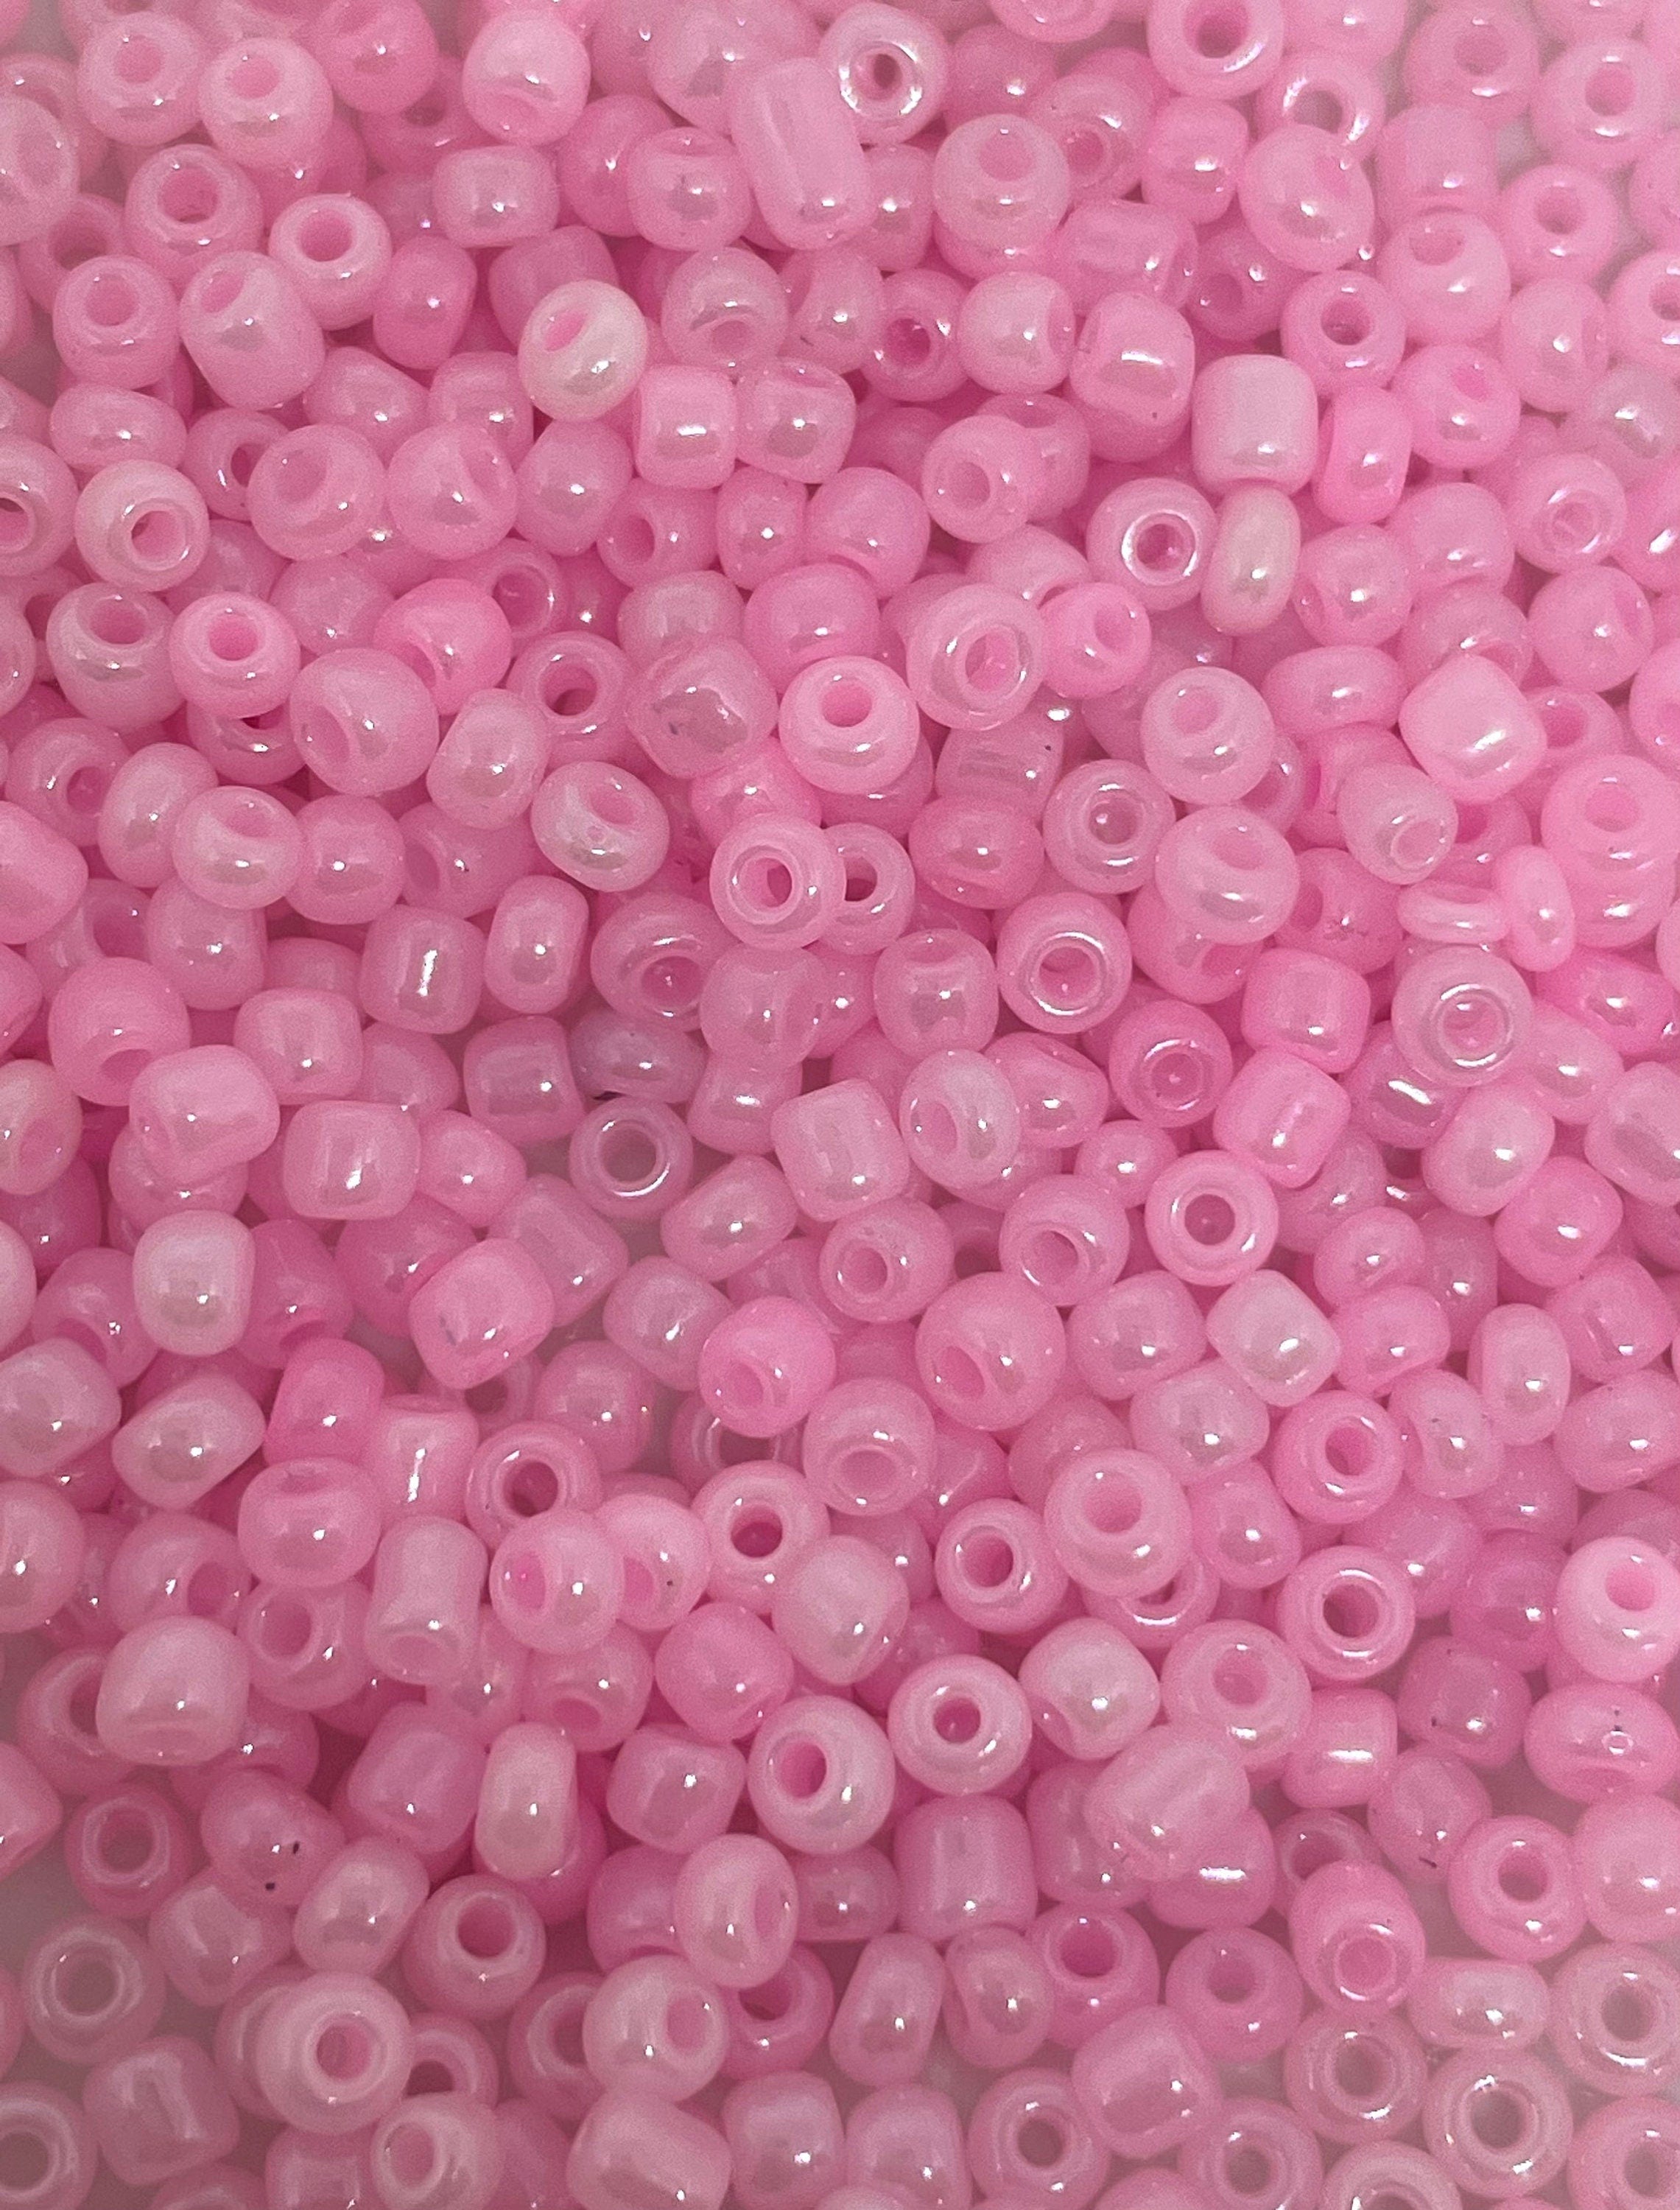 Tiny Baby Pink Seed Beads, 3mm Glass Czech Beads for Jewelry Making, Beaded Necklace, Dainty Jewelry